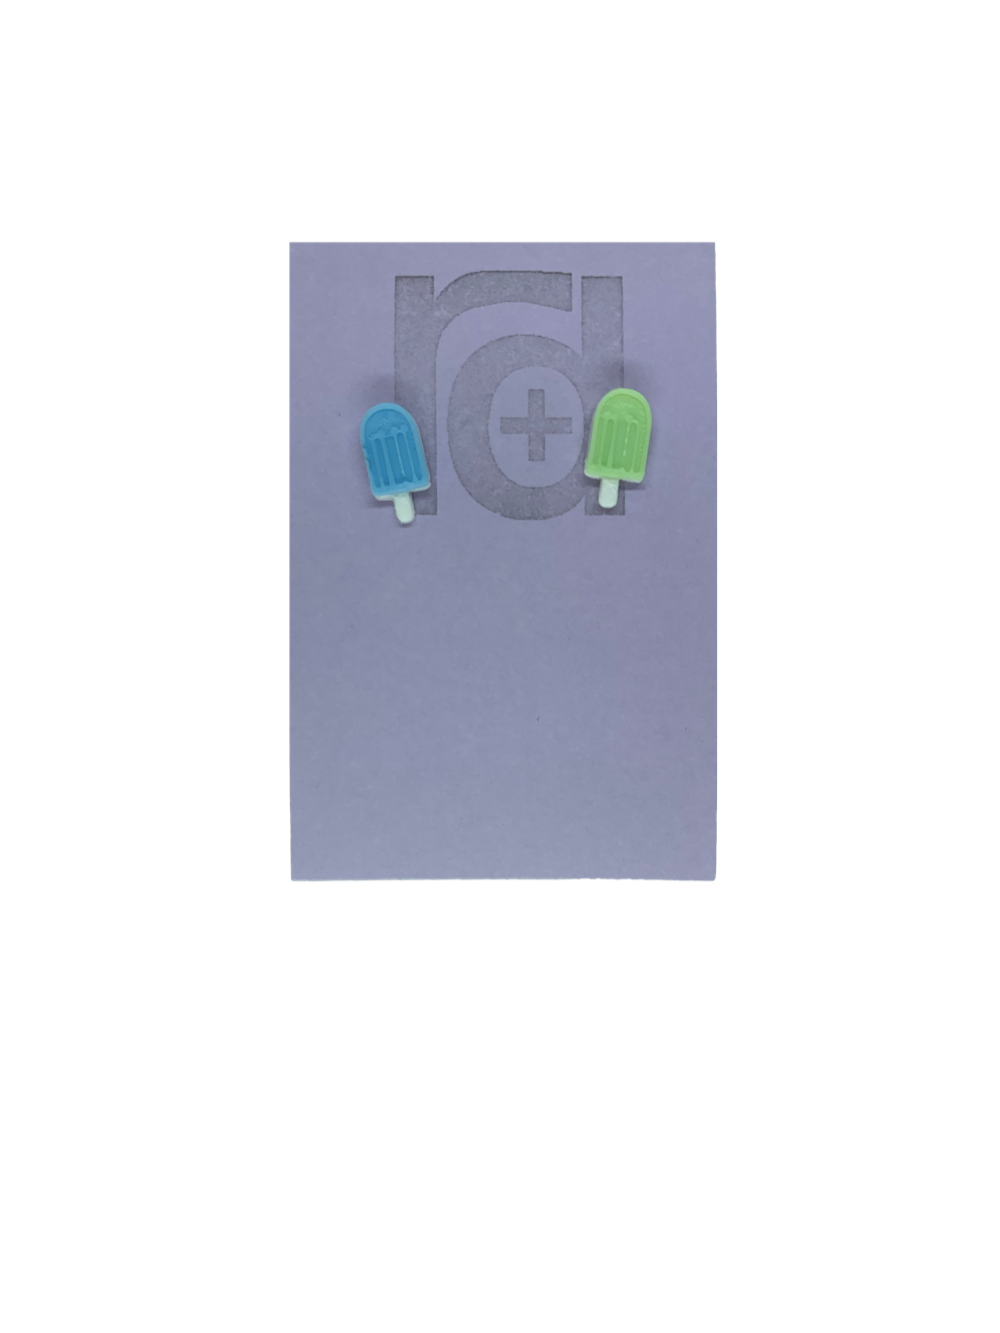 Two small and detailed R+D earrings are shown on a purple earring card. They are shaped as popsicles with white sticks. The earrings are mismatched, one popsicle is light blue and one is light mint green.